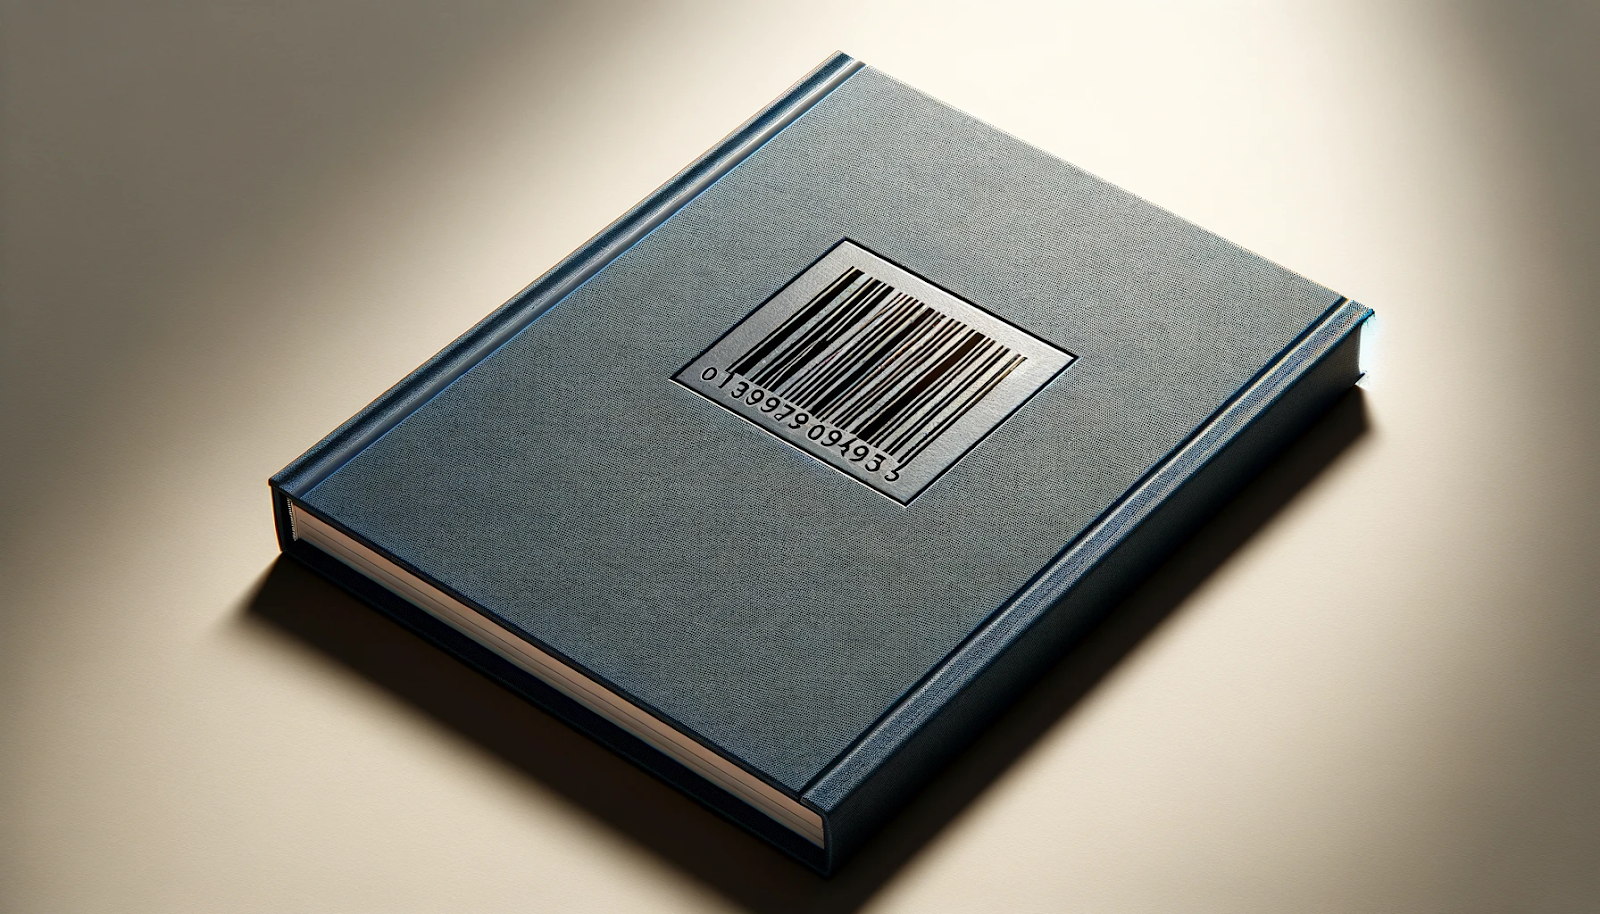 ISBN barcode placement